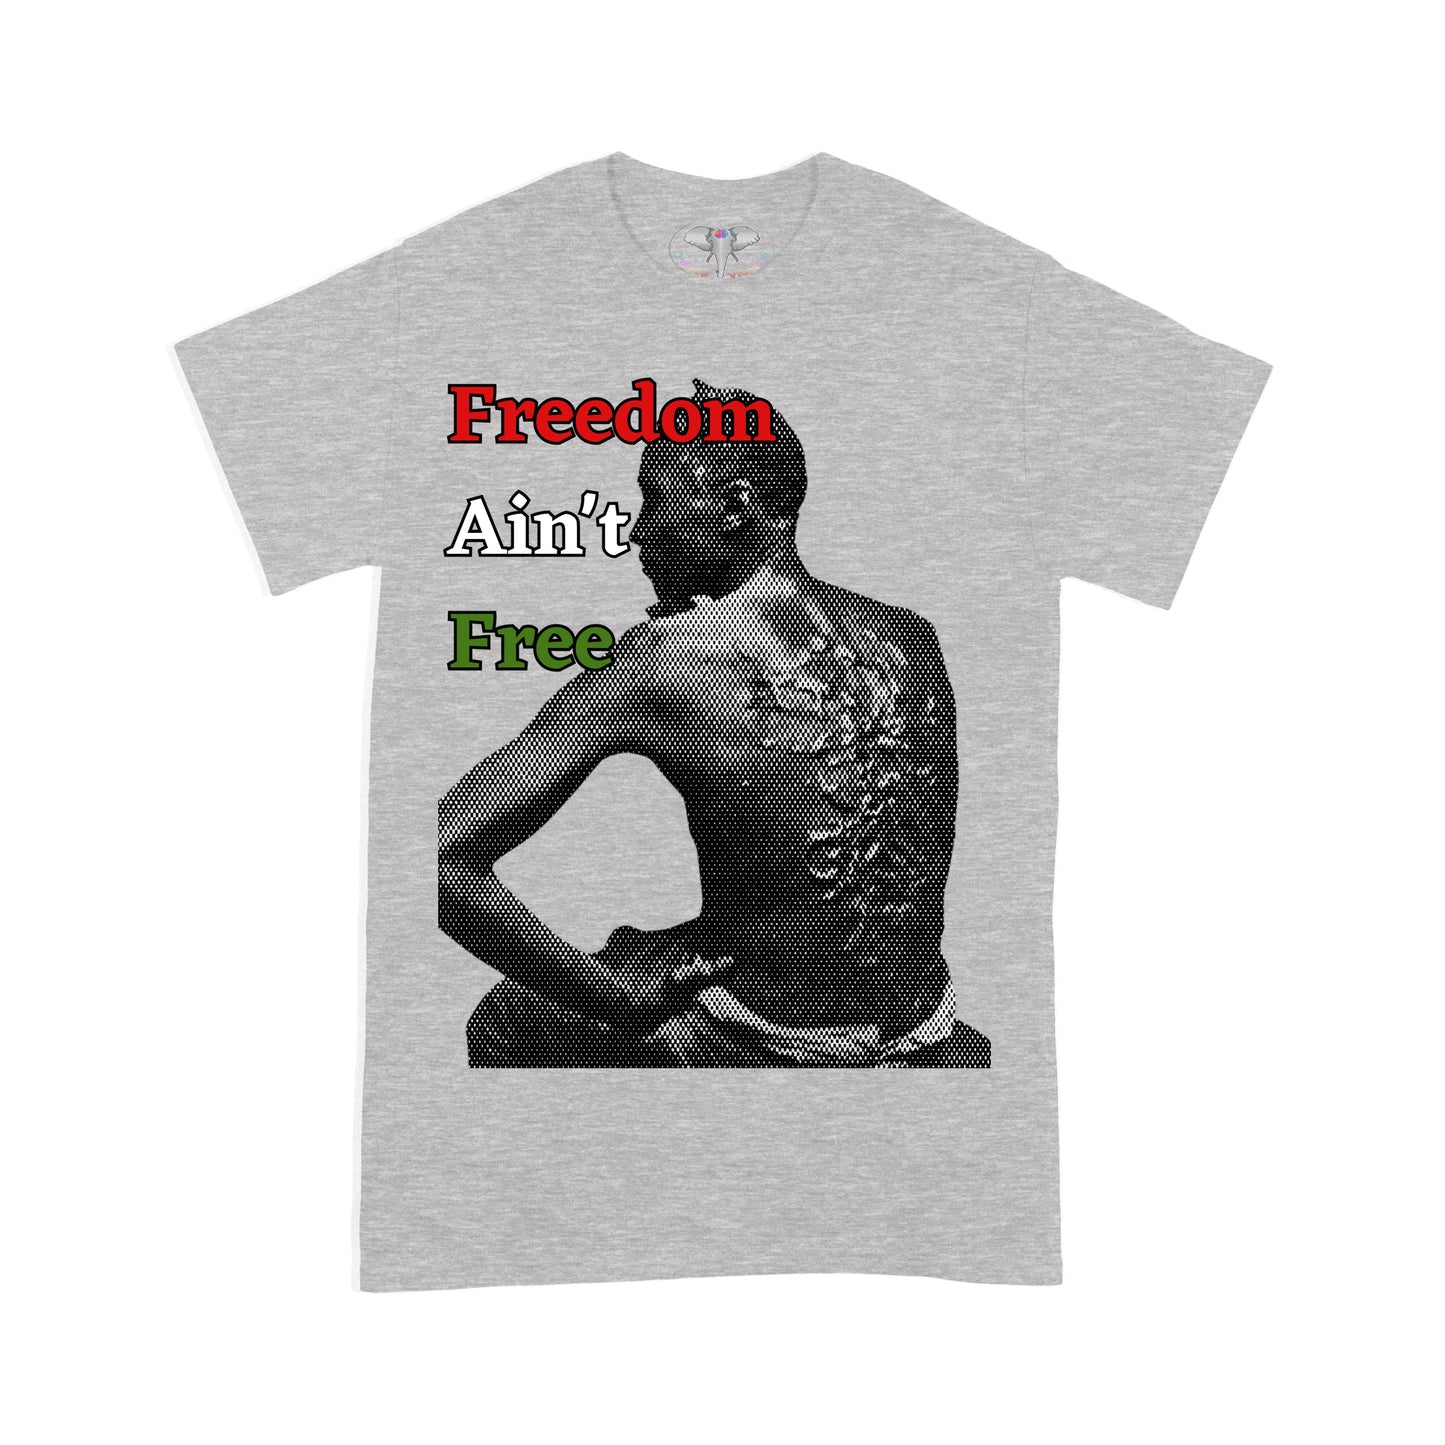 Freedom Ain't Free Graphic T-shirt